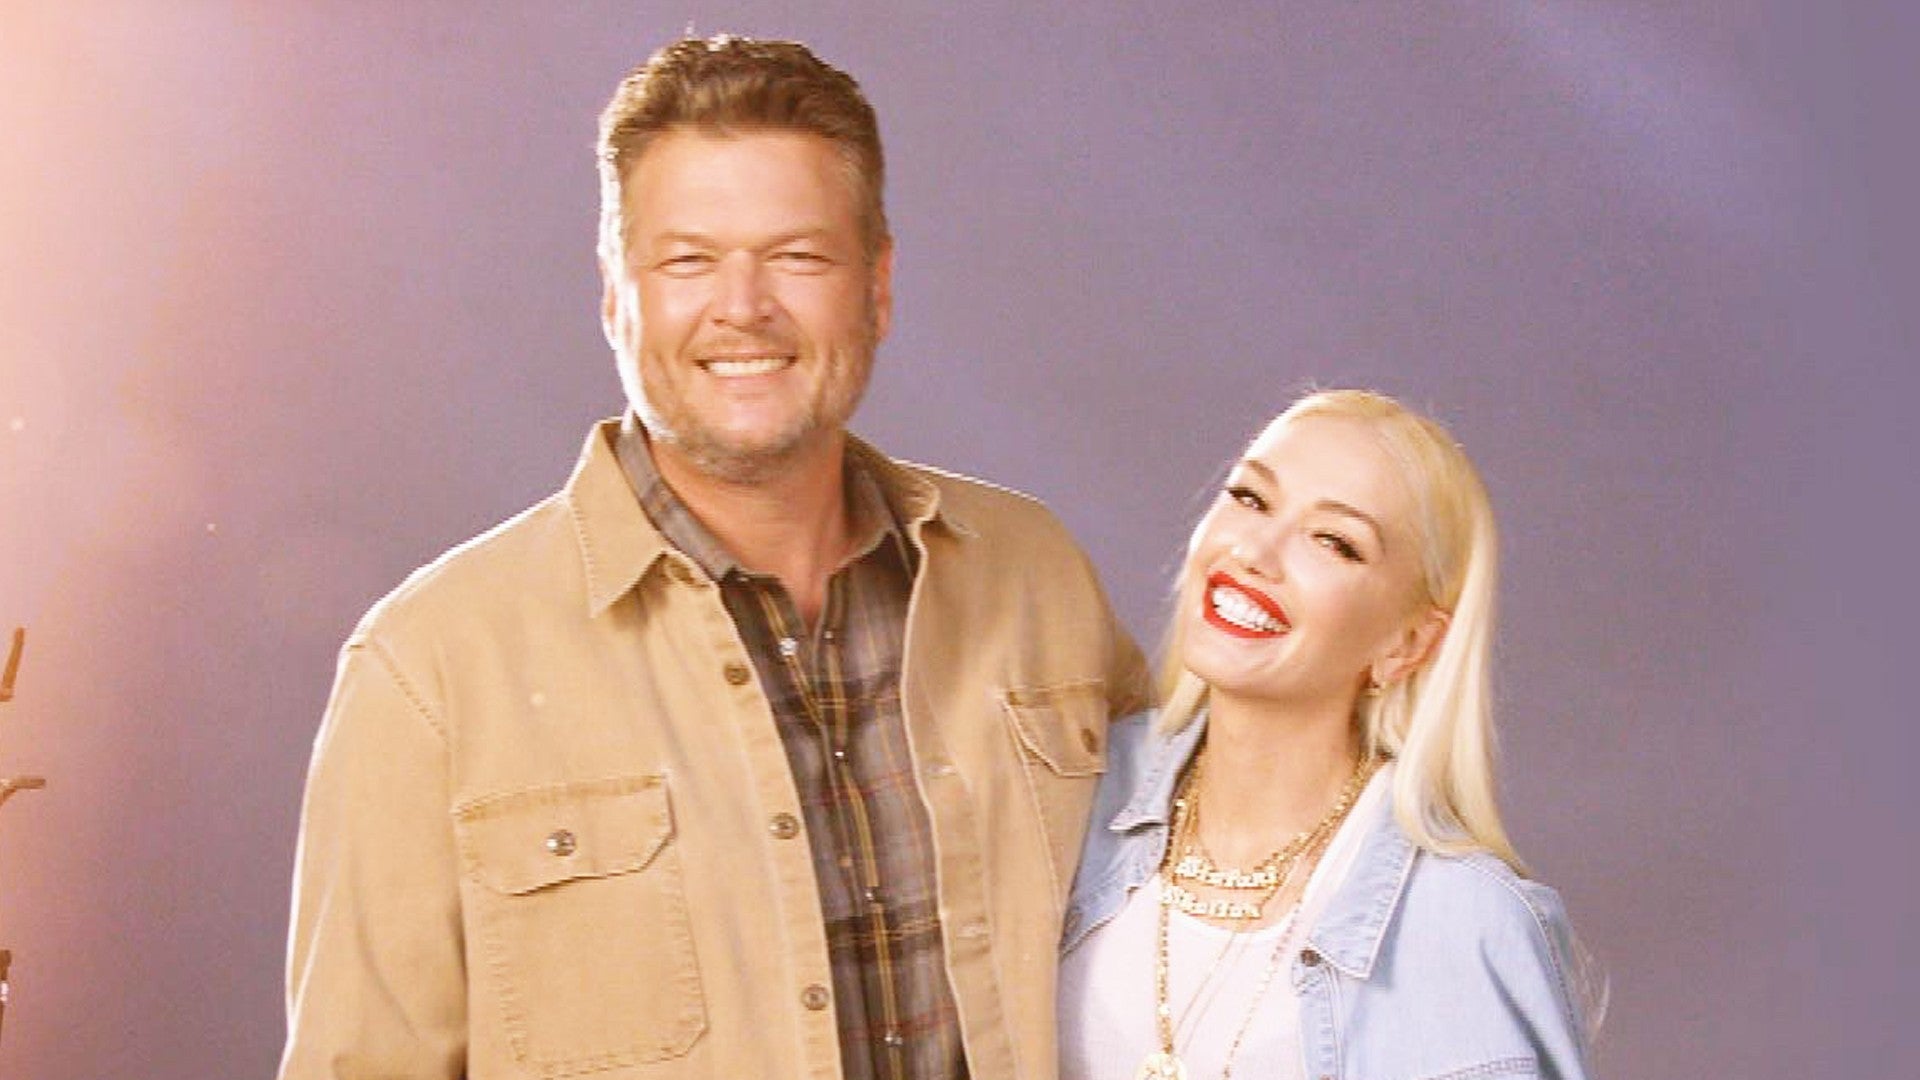 Gwen Stefani Debuts Engagement Ring on 'The Voice' Live Shows | Entertainment Tonight